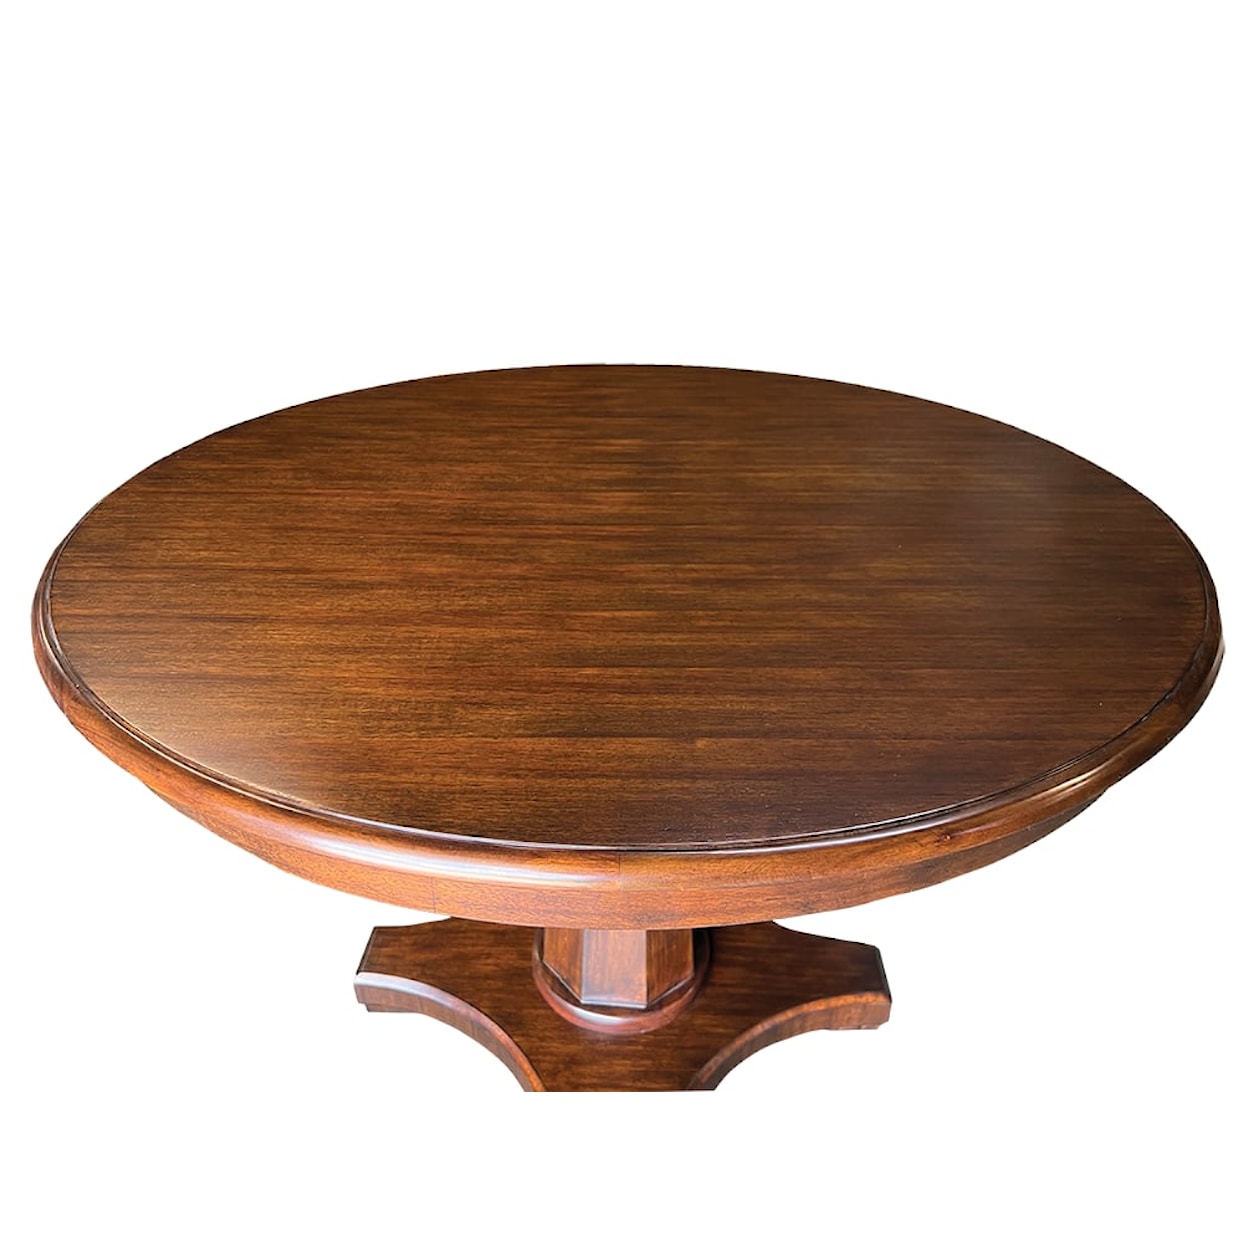 Oliver Home Furnishings Dining Tables OGEE TOP PEDESTAL TABLE- CHOCOLATE